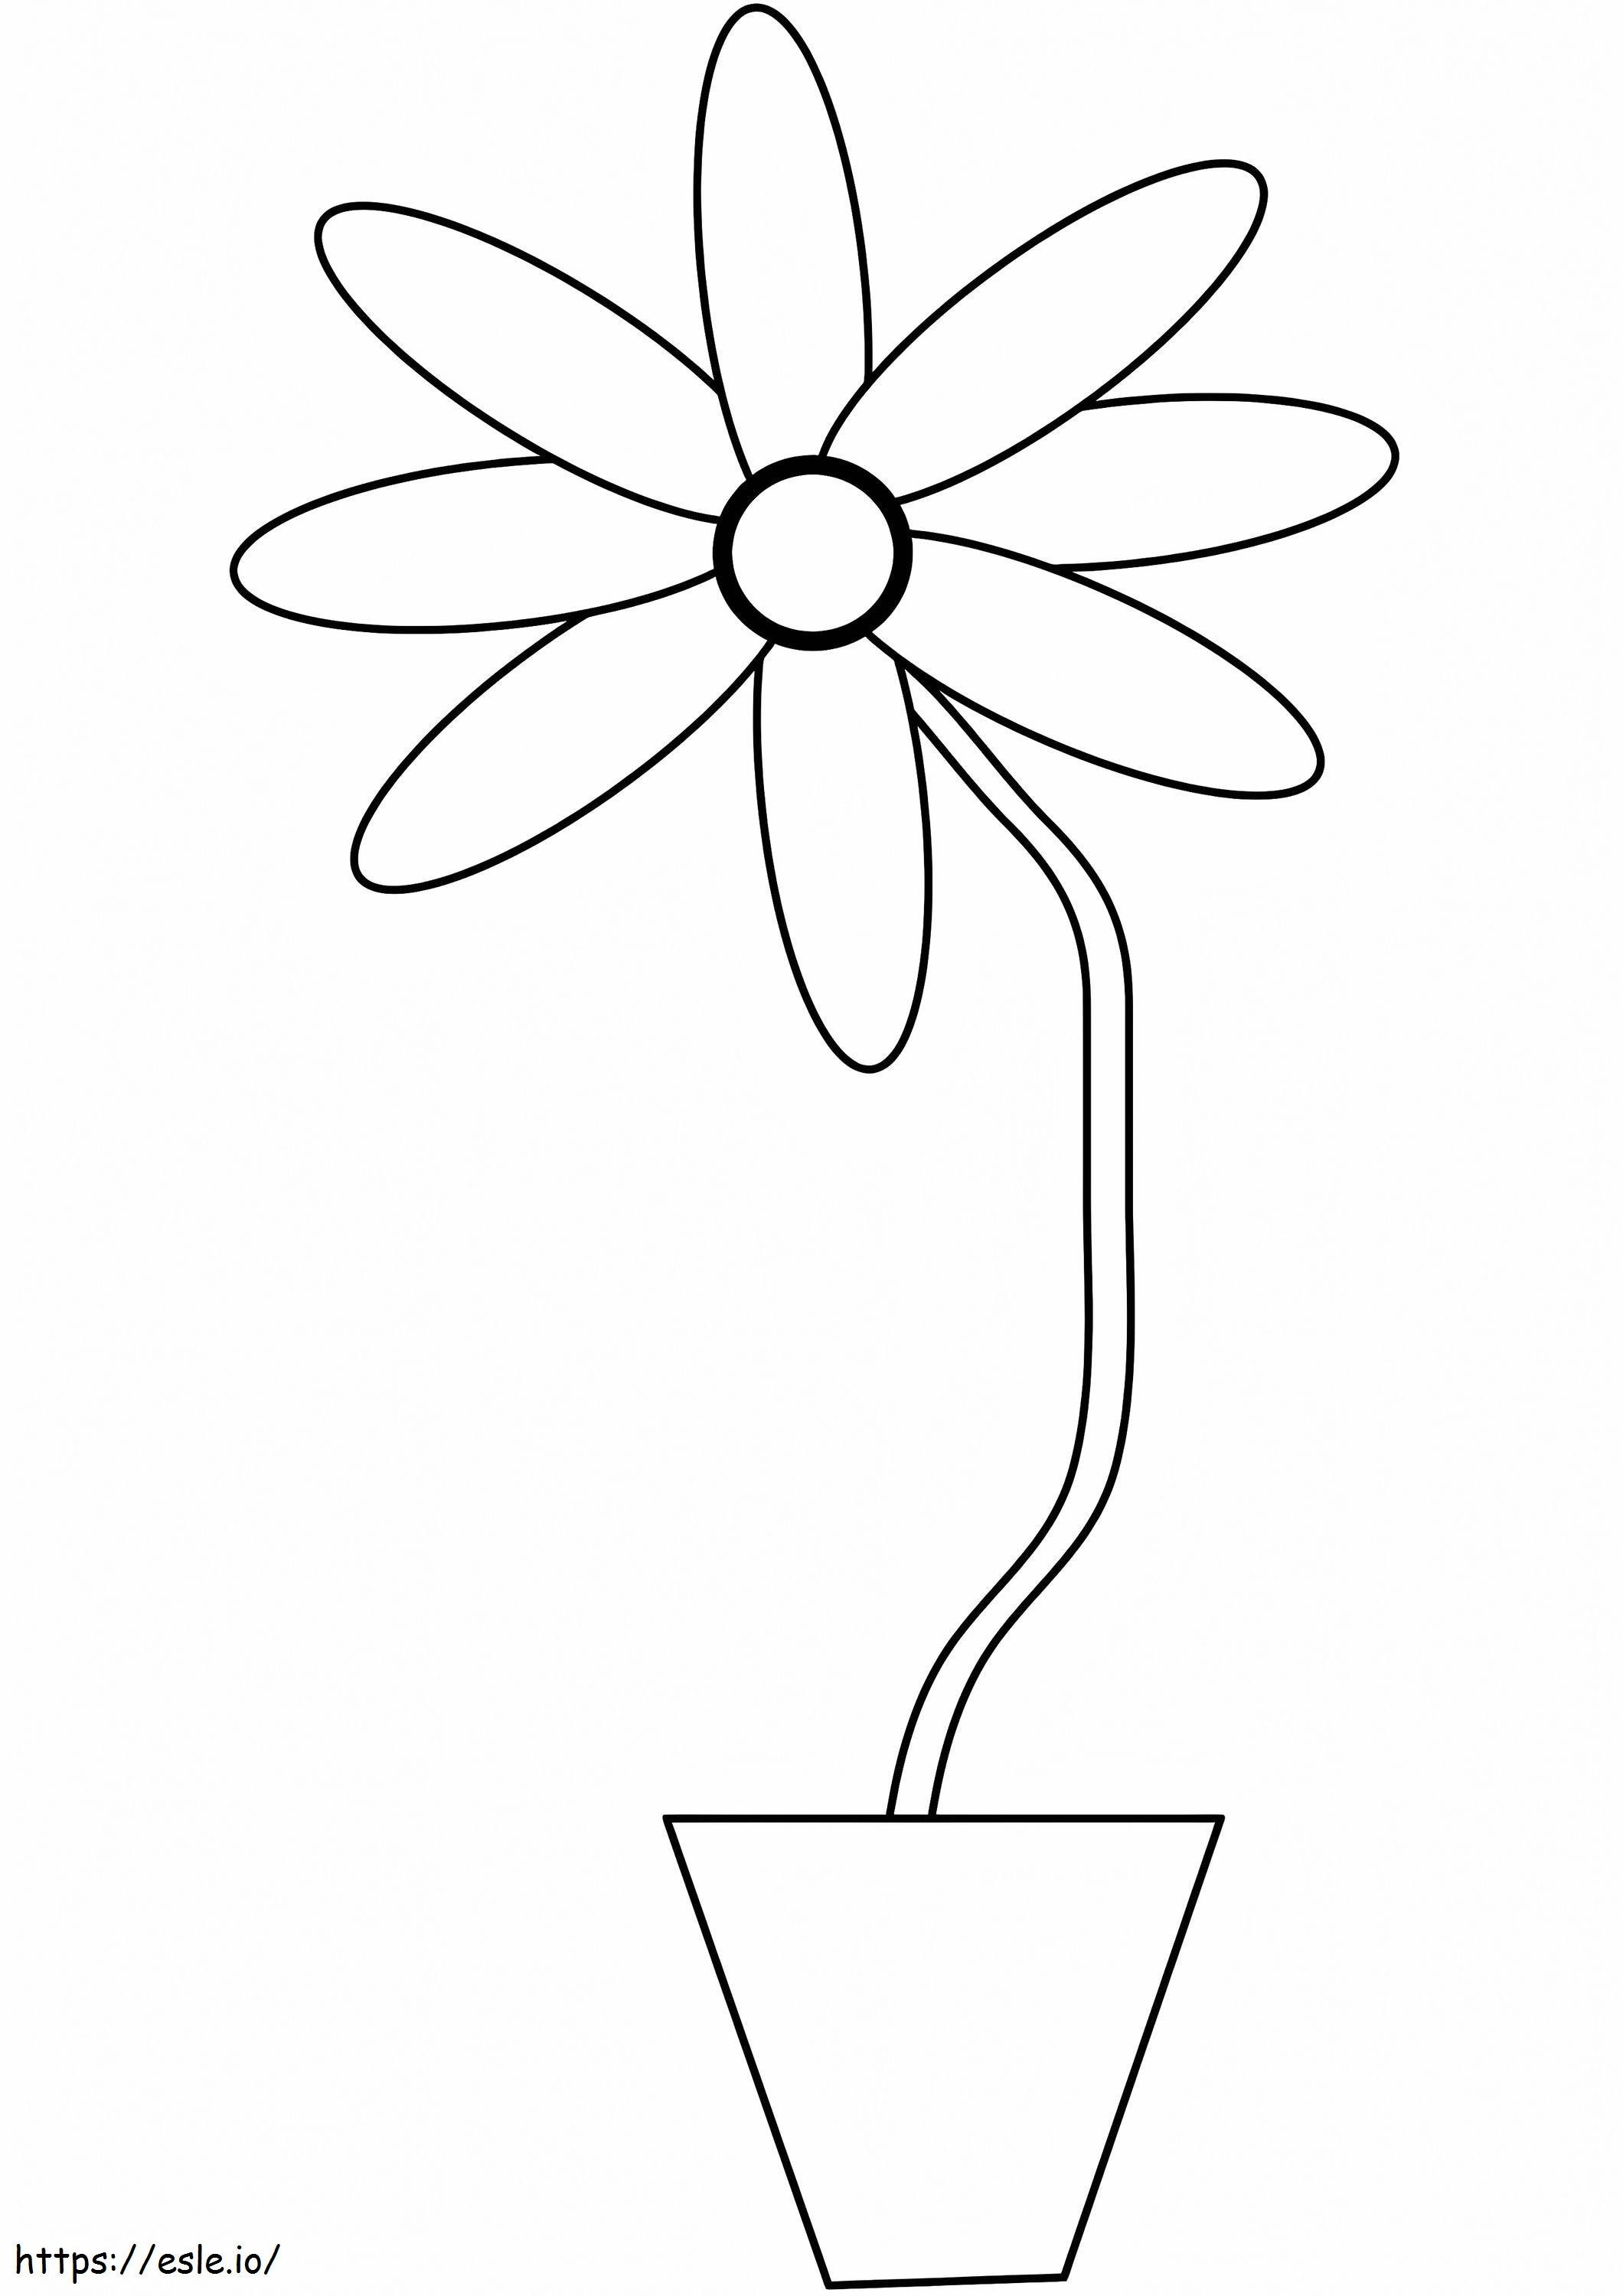 Flower In A Pot coloring page